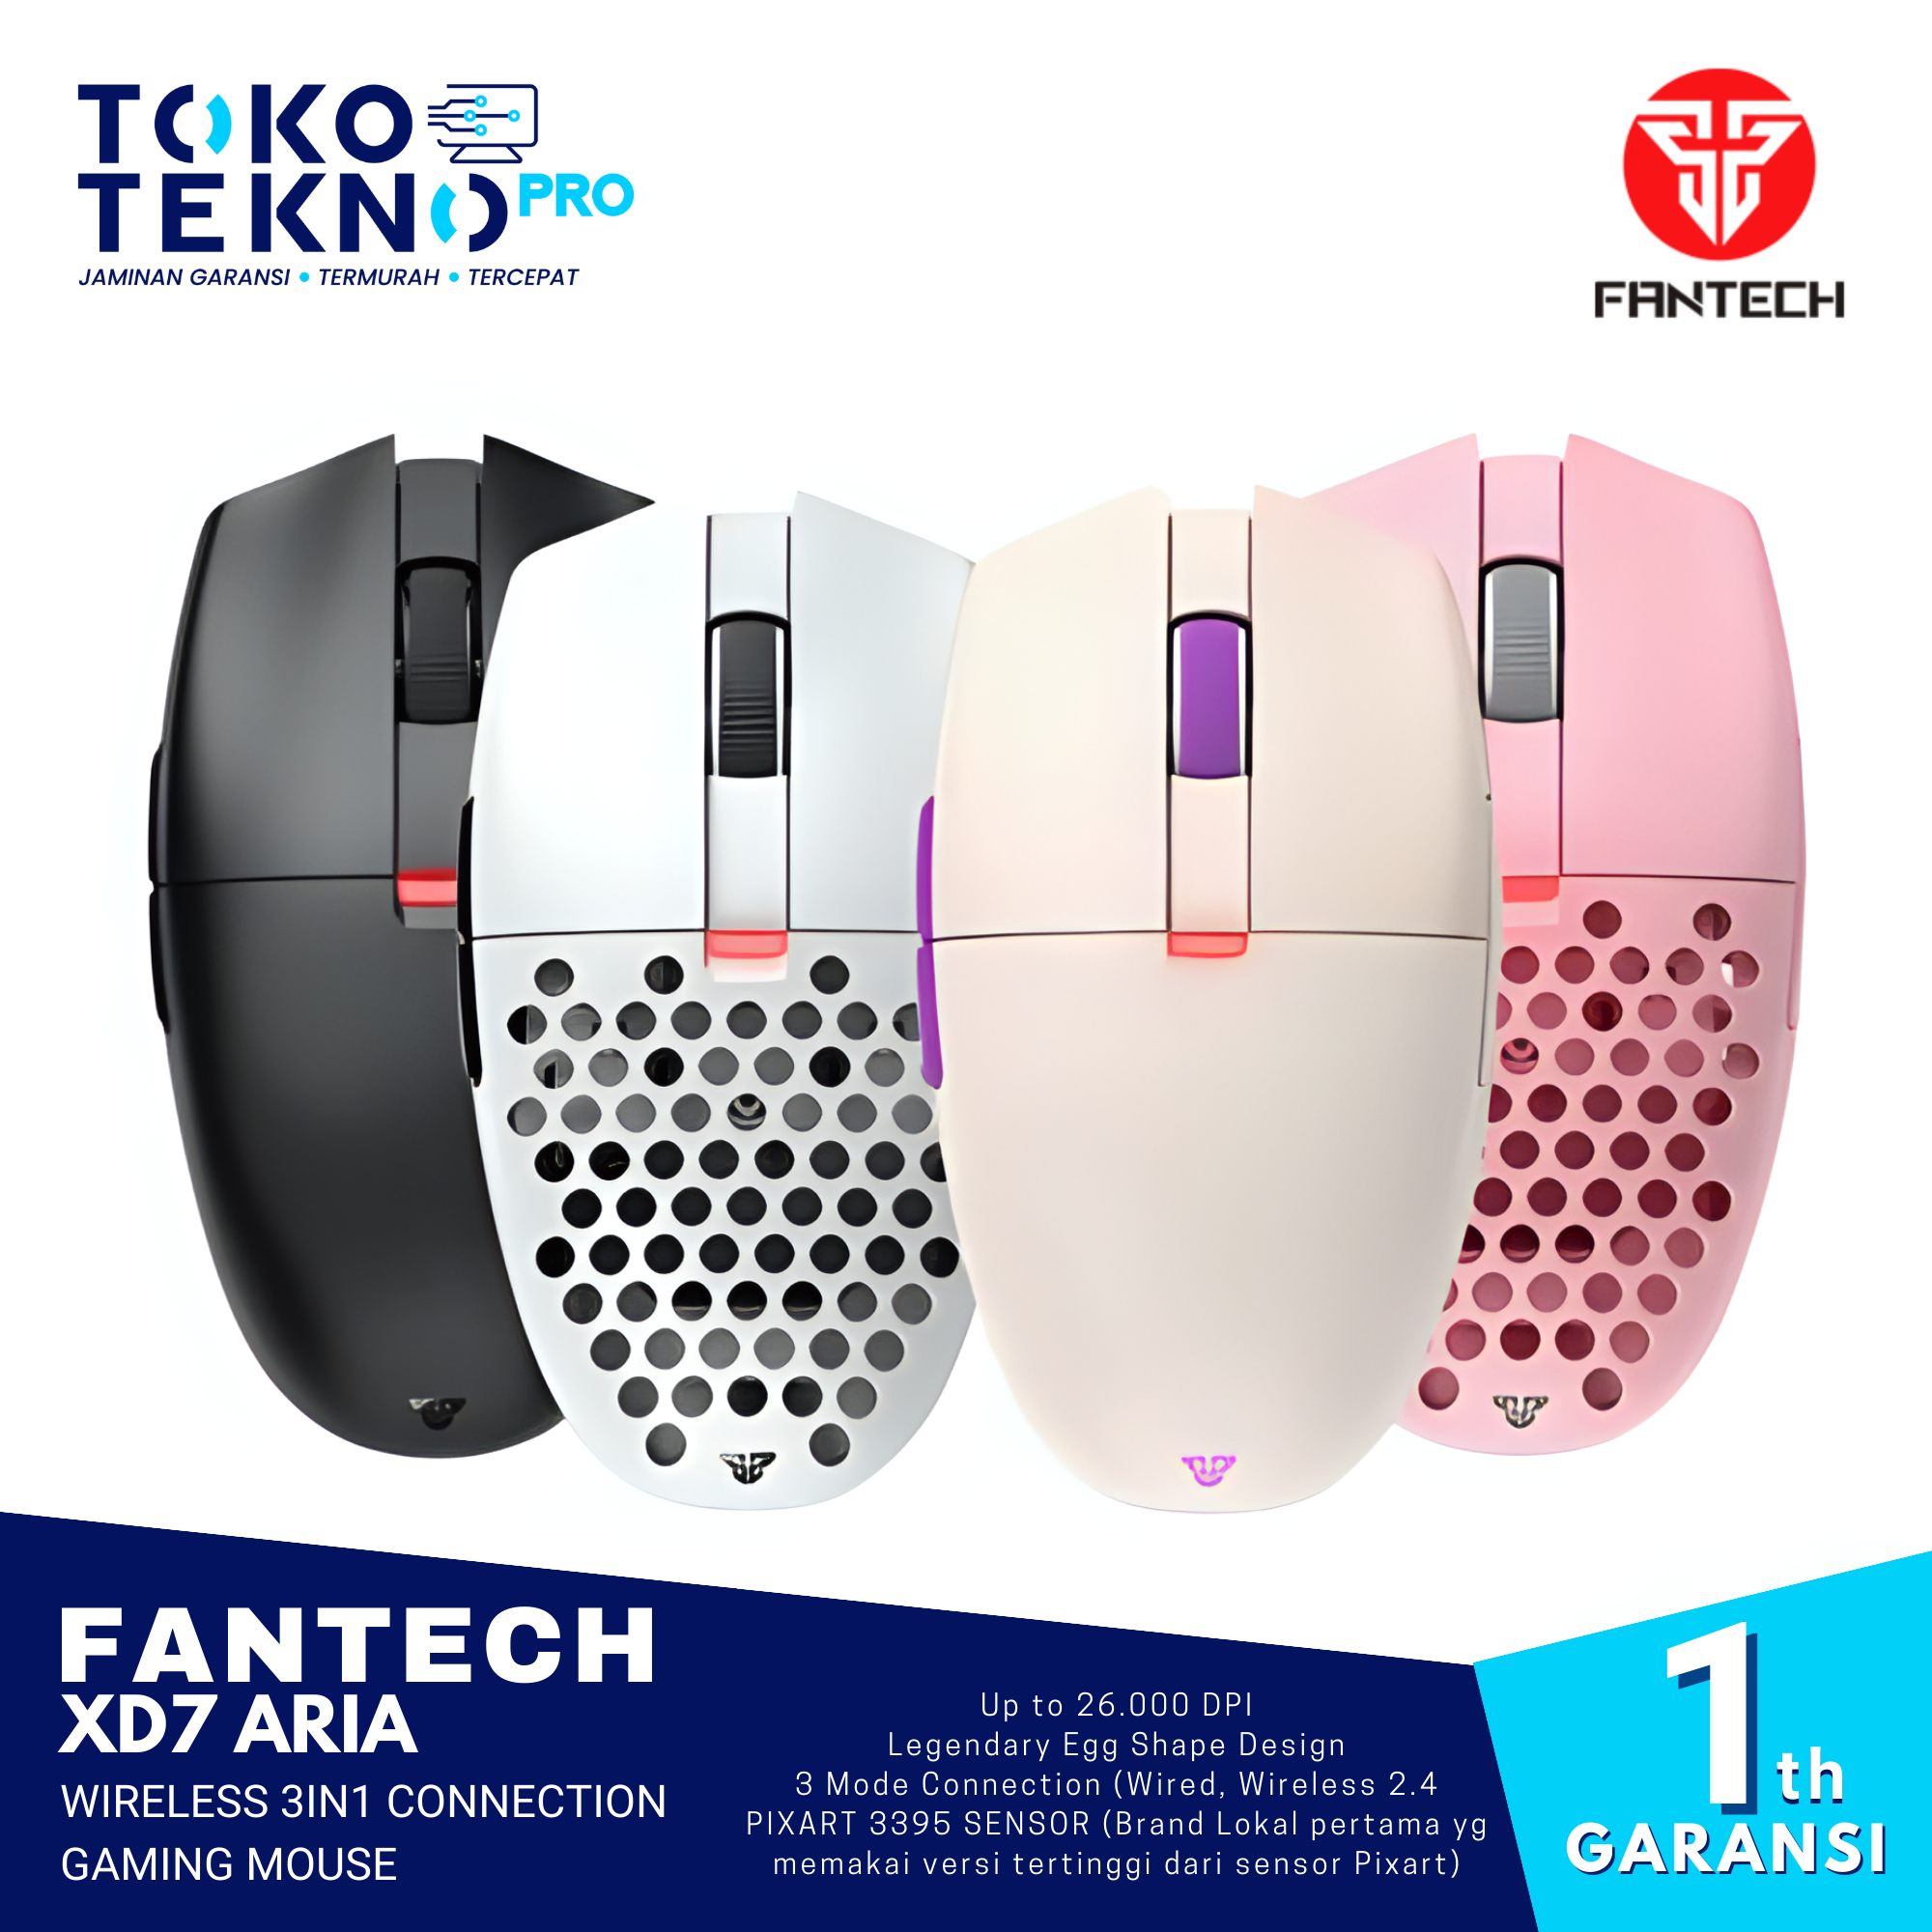 Fantech XD7 Aria Wireless 3in1 Connection Gaming Mouse